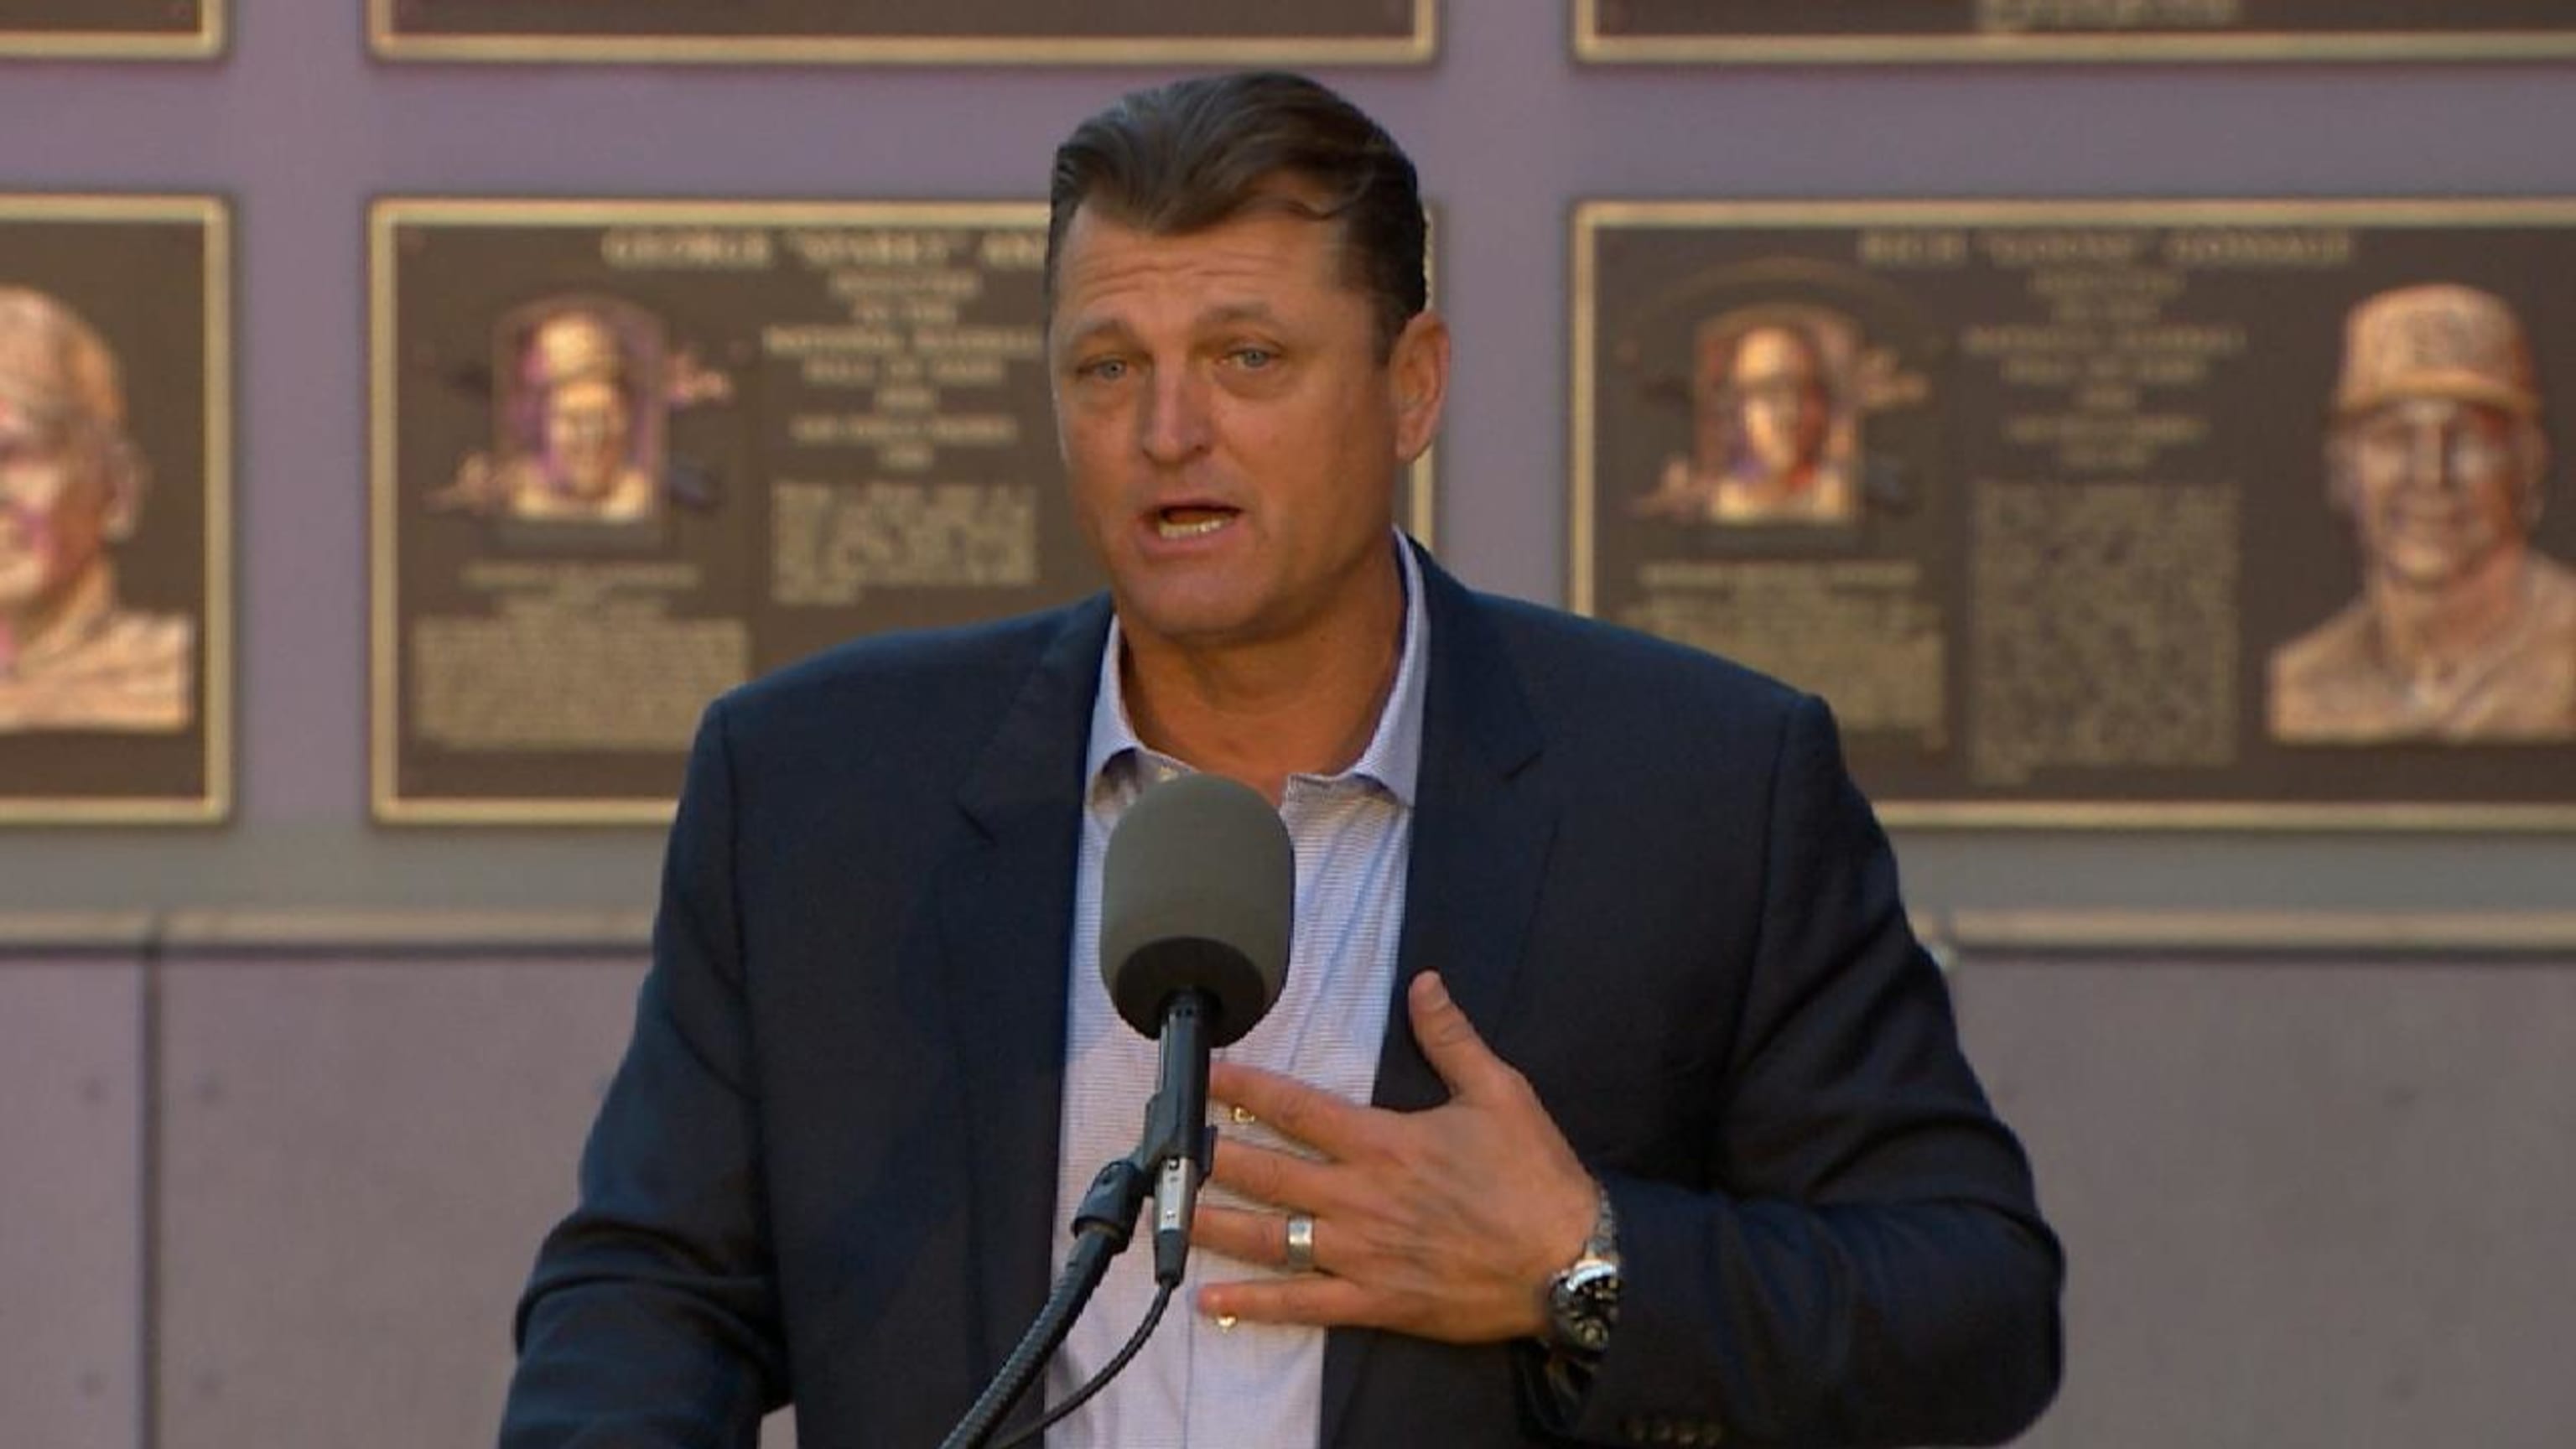 Former Wildcat Trevor Hoffman Officially Inducted into MLB Hall of